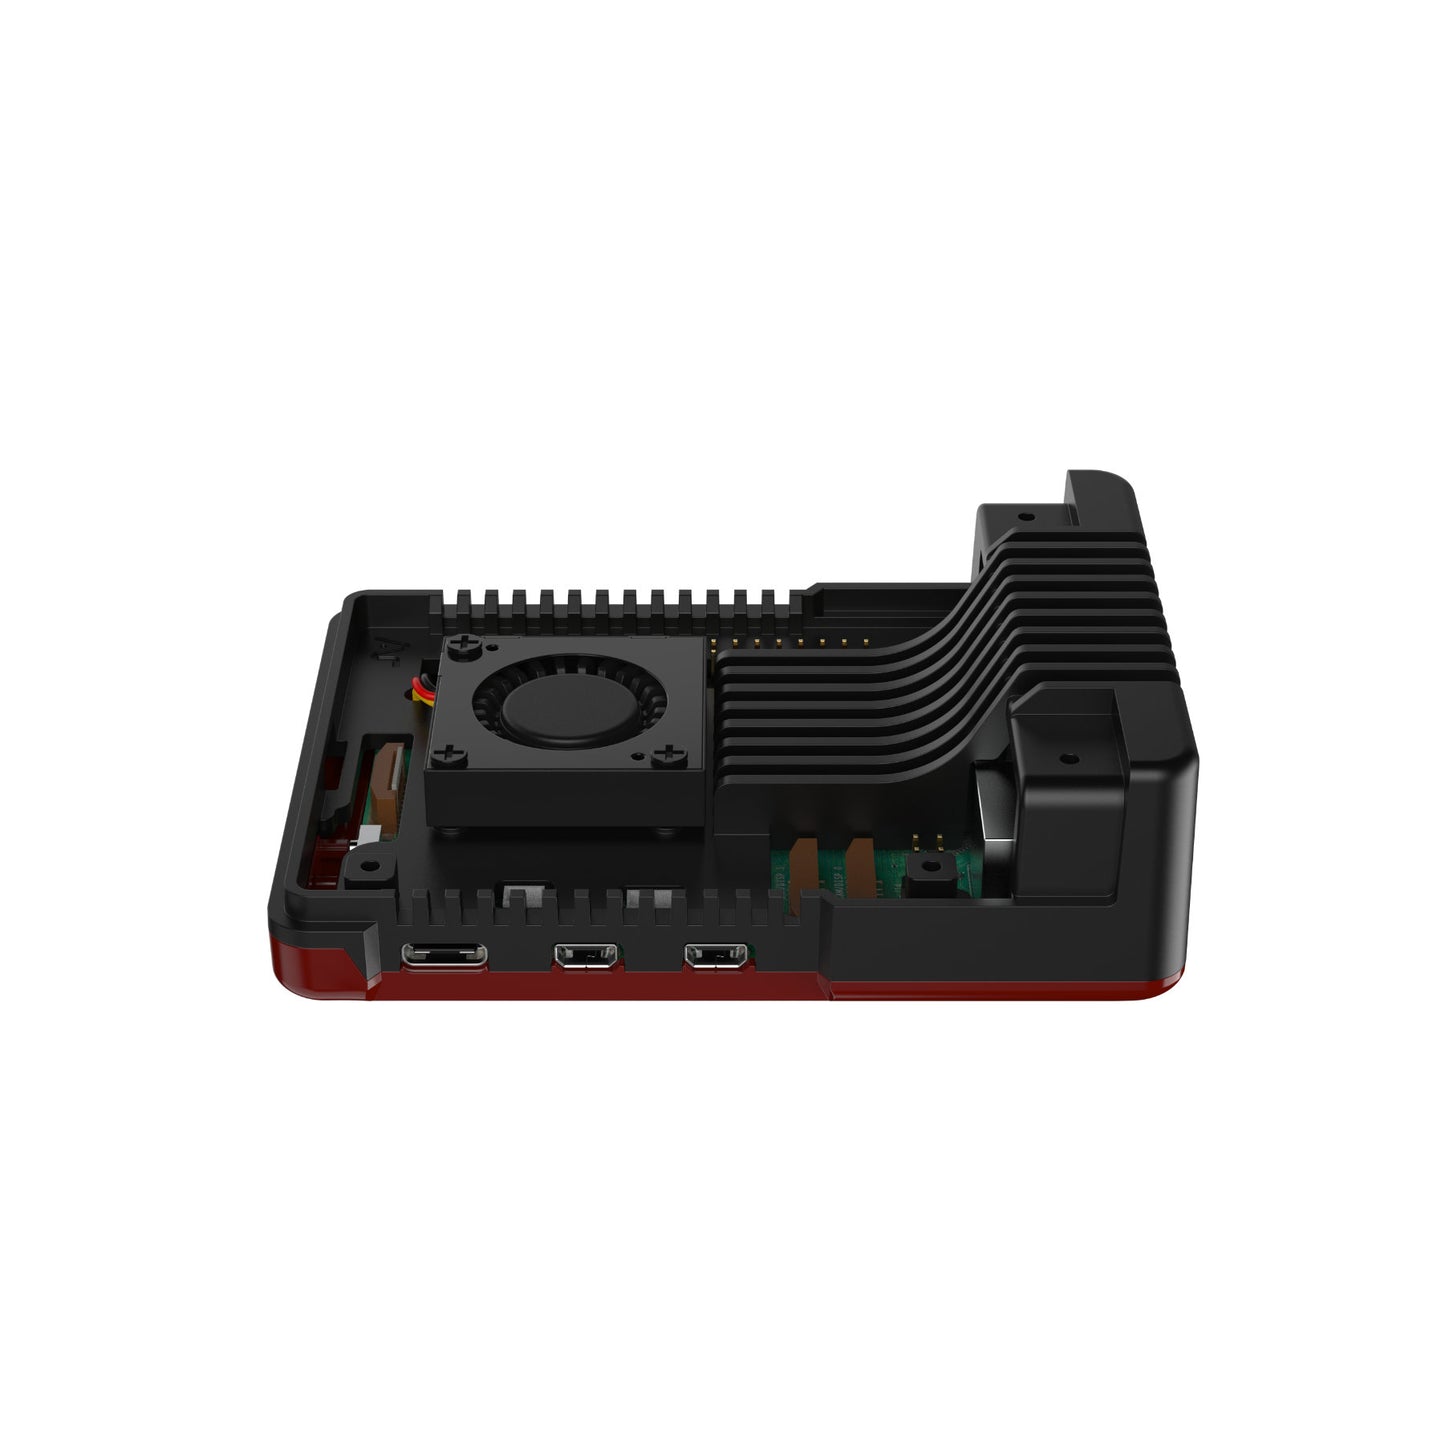 Argon NEO 5 BRED Case for Raspberry Pi 5 with built-in fan